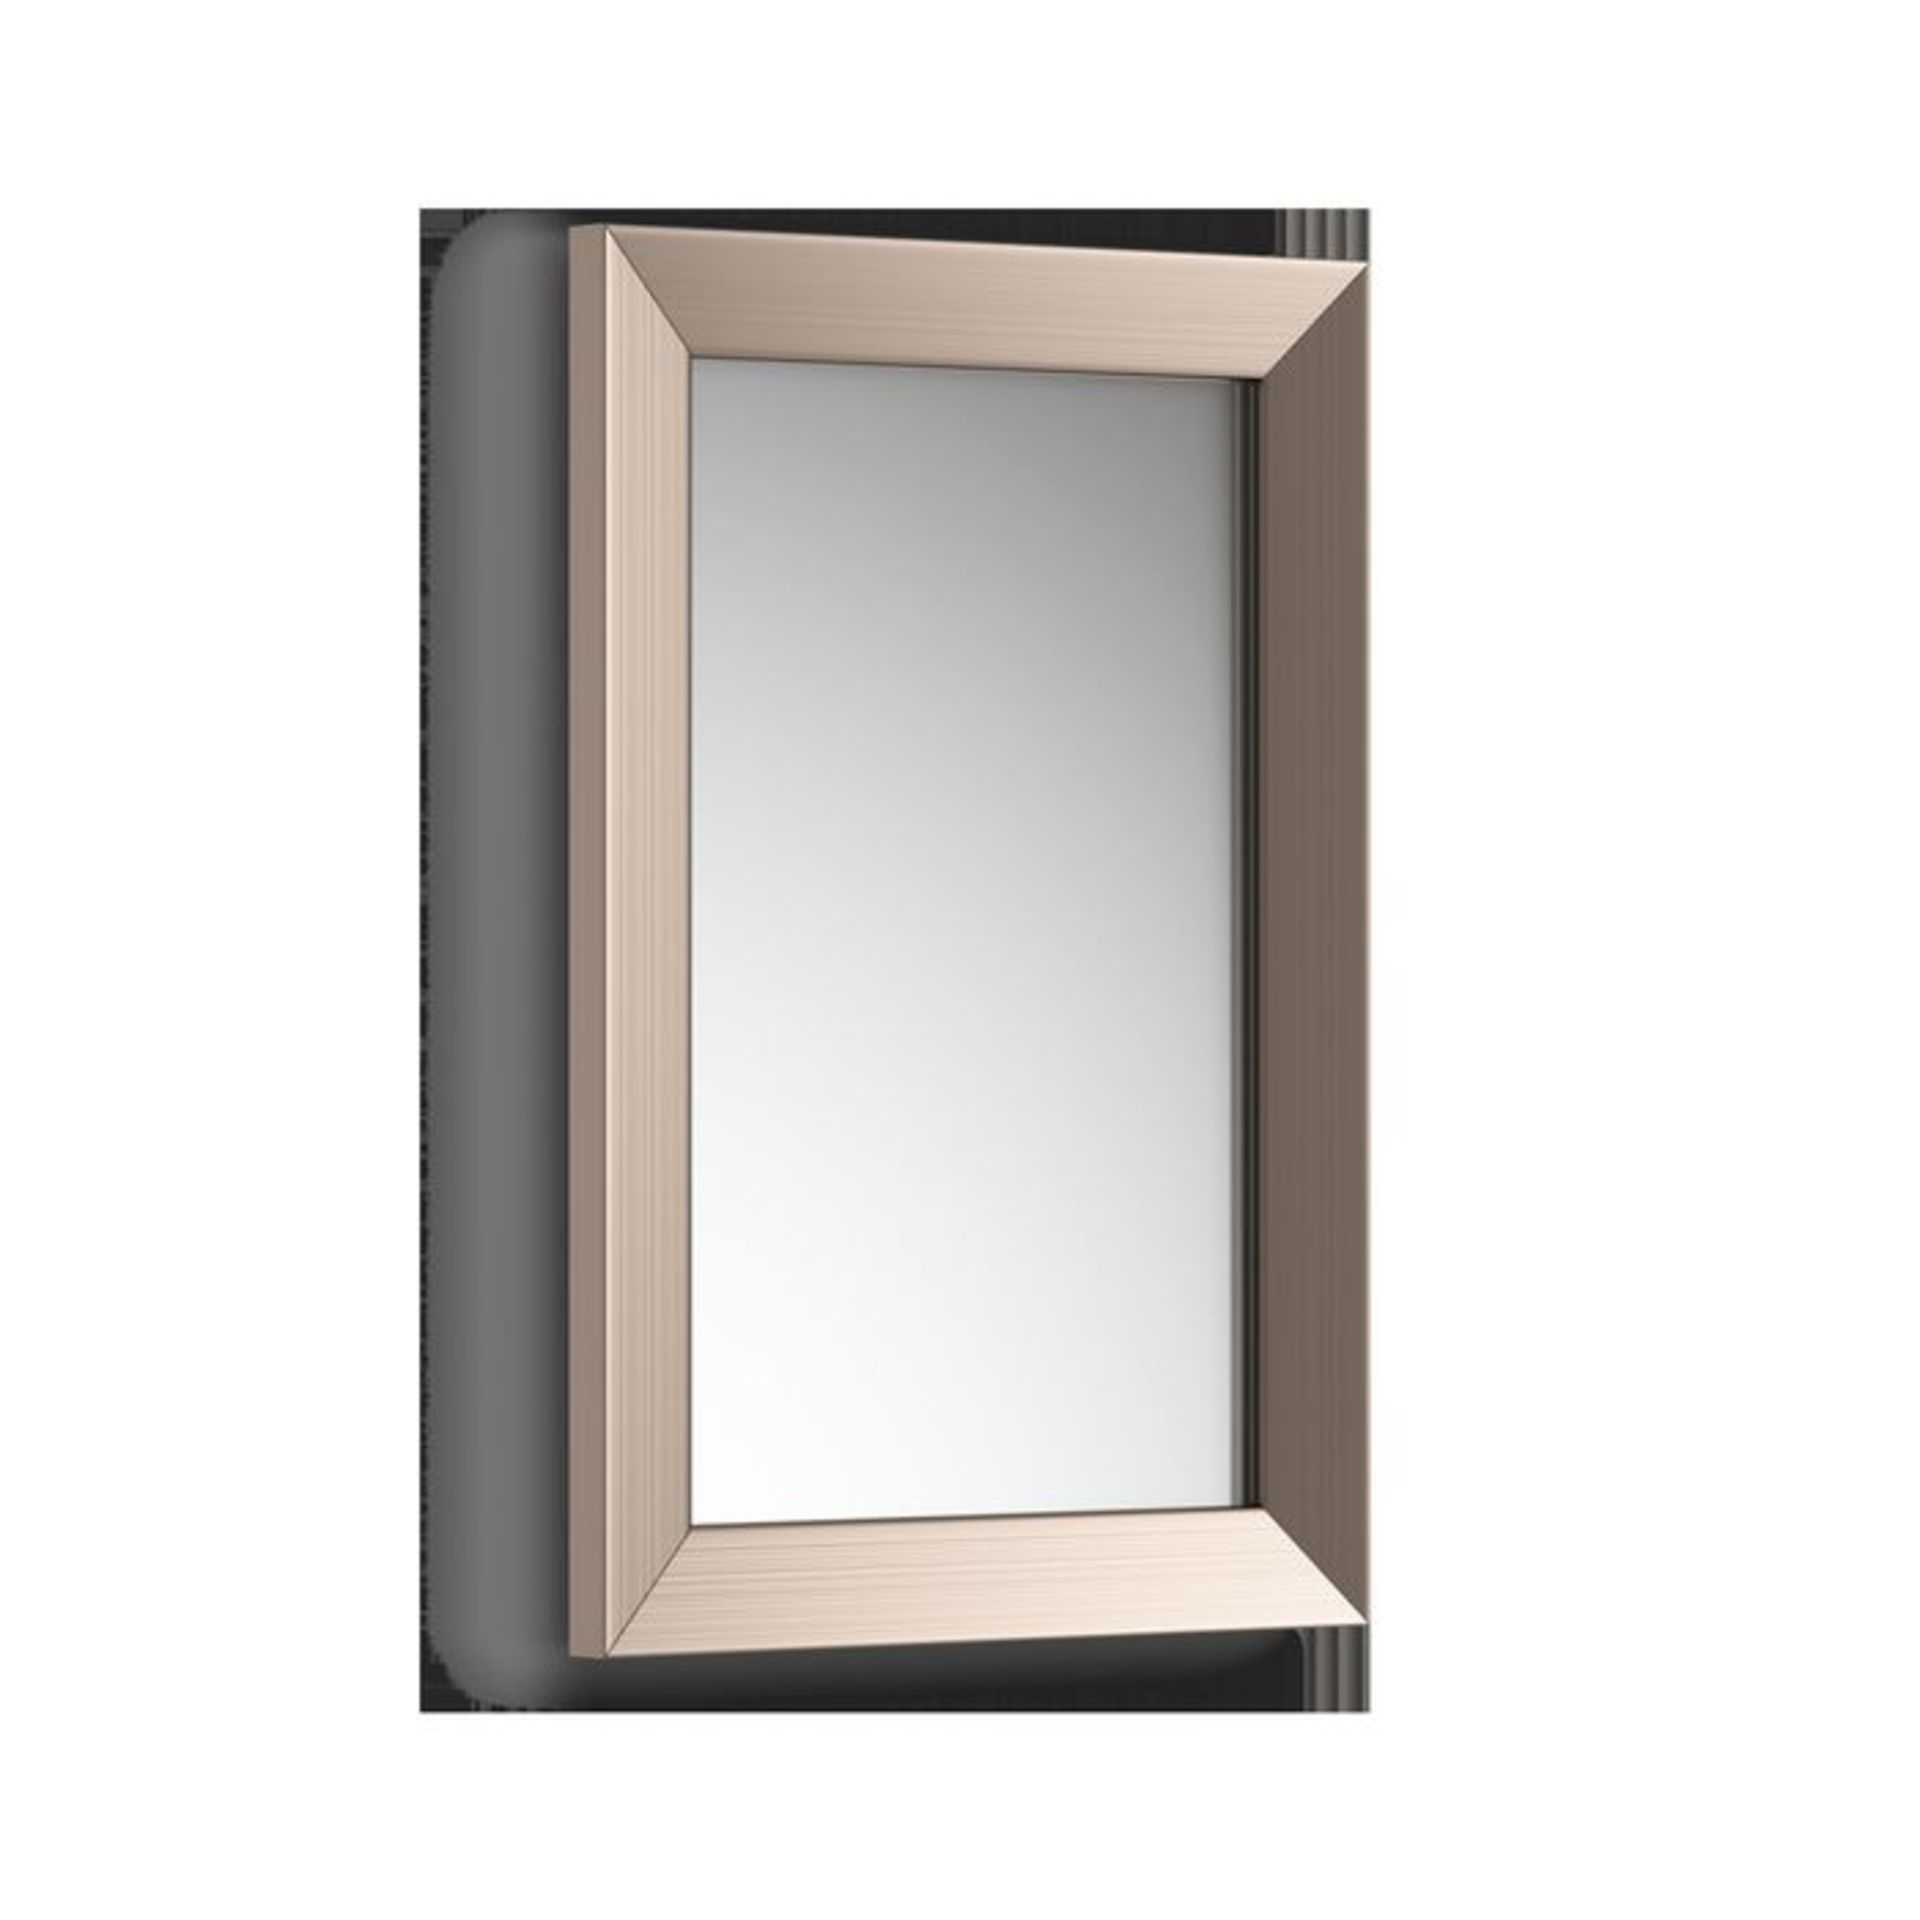 (M161) 300x450mm Clover Metallic Nickel Framed Mirror. Made from eco friendly recycled plastics - Image 3 of 3